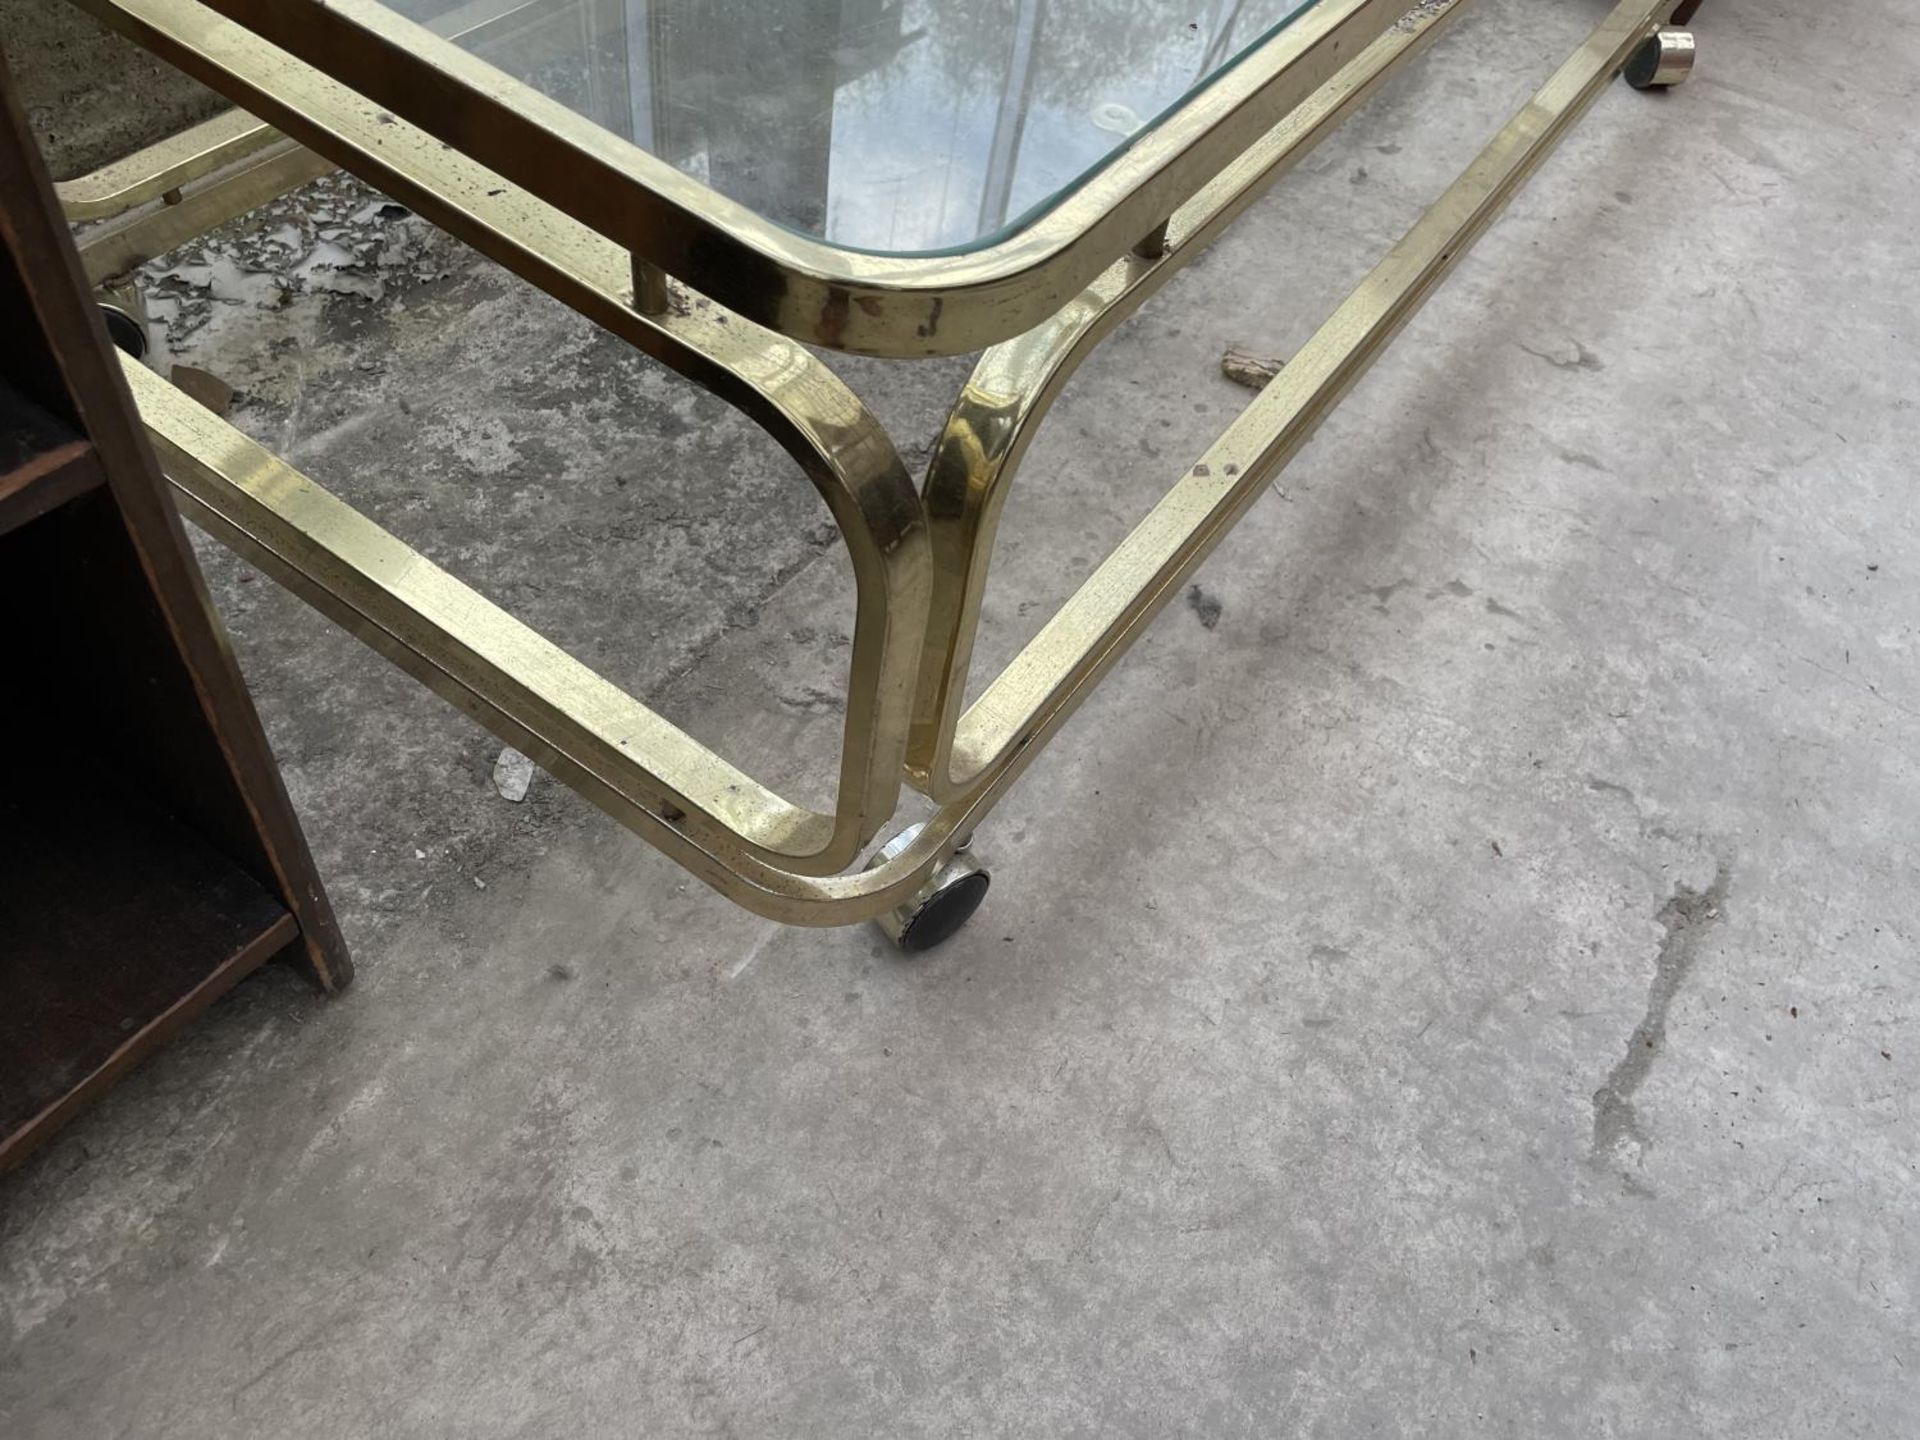 A MODERN BRASS FRAMED COFFEE TABLE WITH GLASS TOP, 54X24" - Image 3 of 3